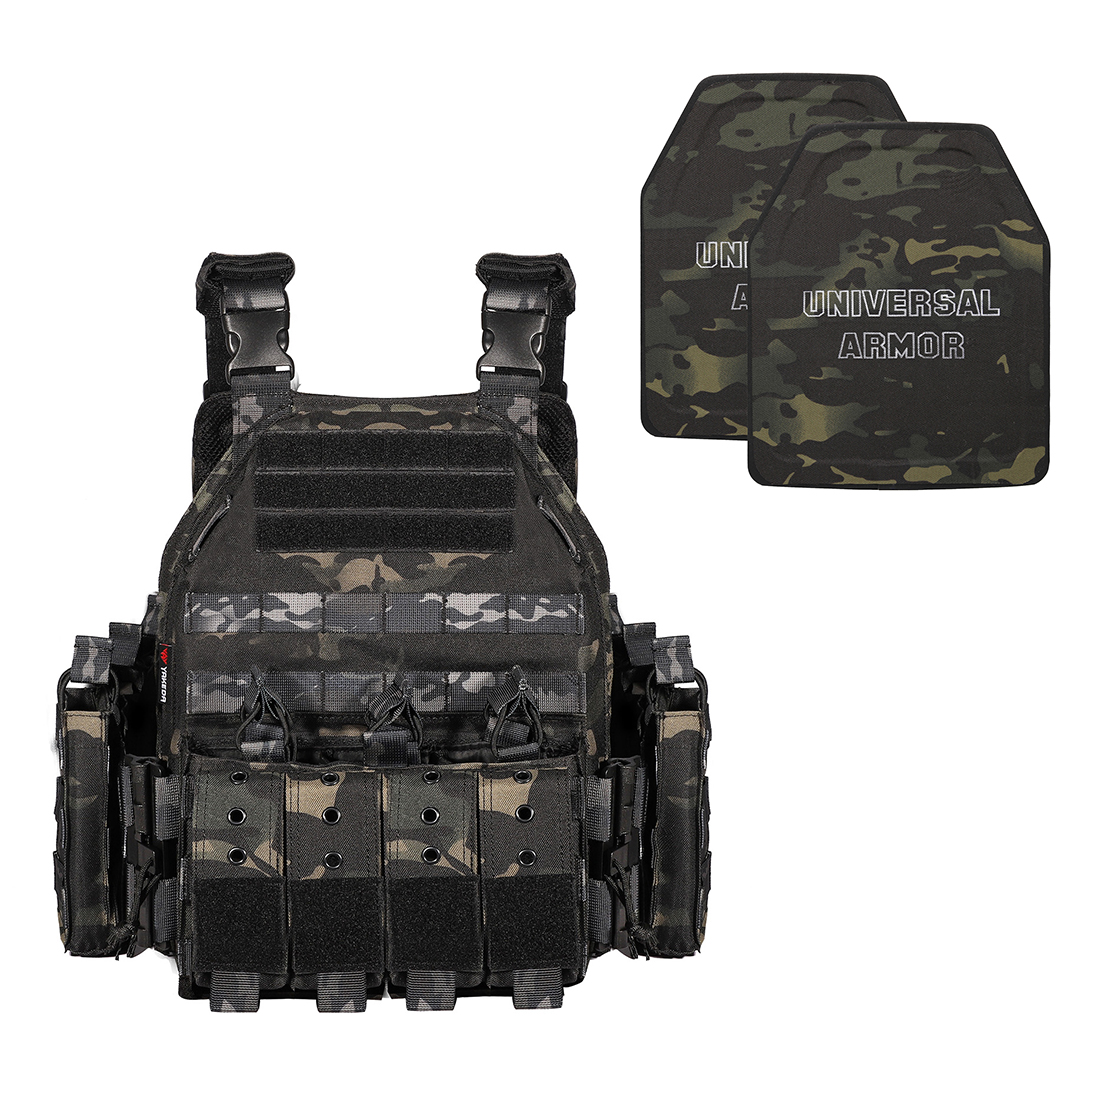 TacticalXmen YAKEDA Quick Release Military Tactical Plate Carrier with UTA NIJ Level IV Body Armor